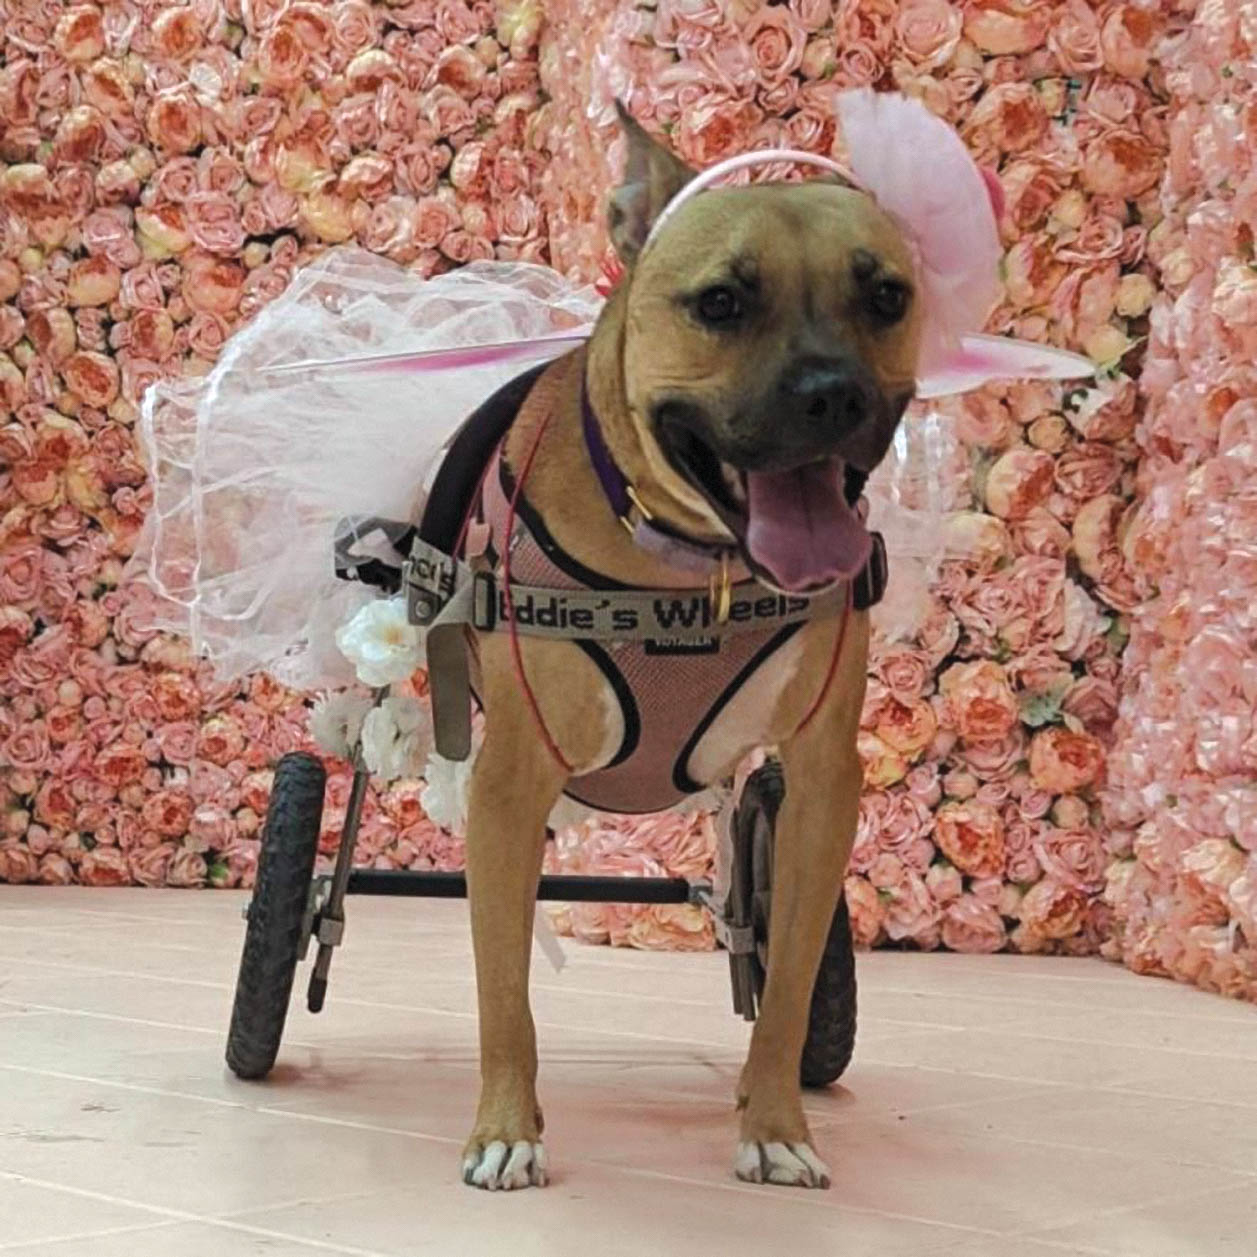 Dog with two legs in a tutu.